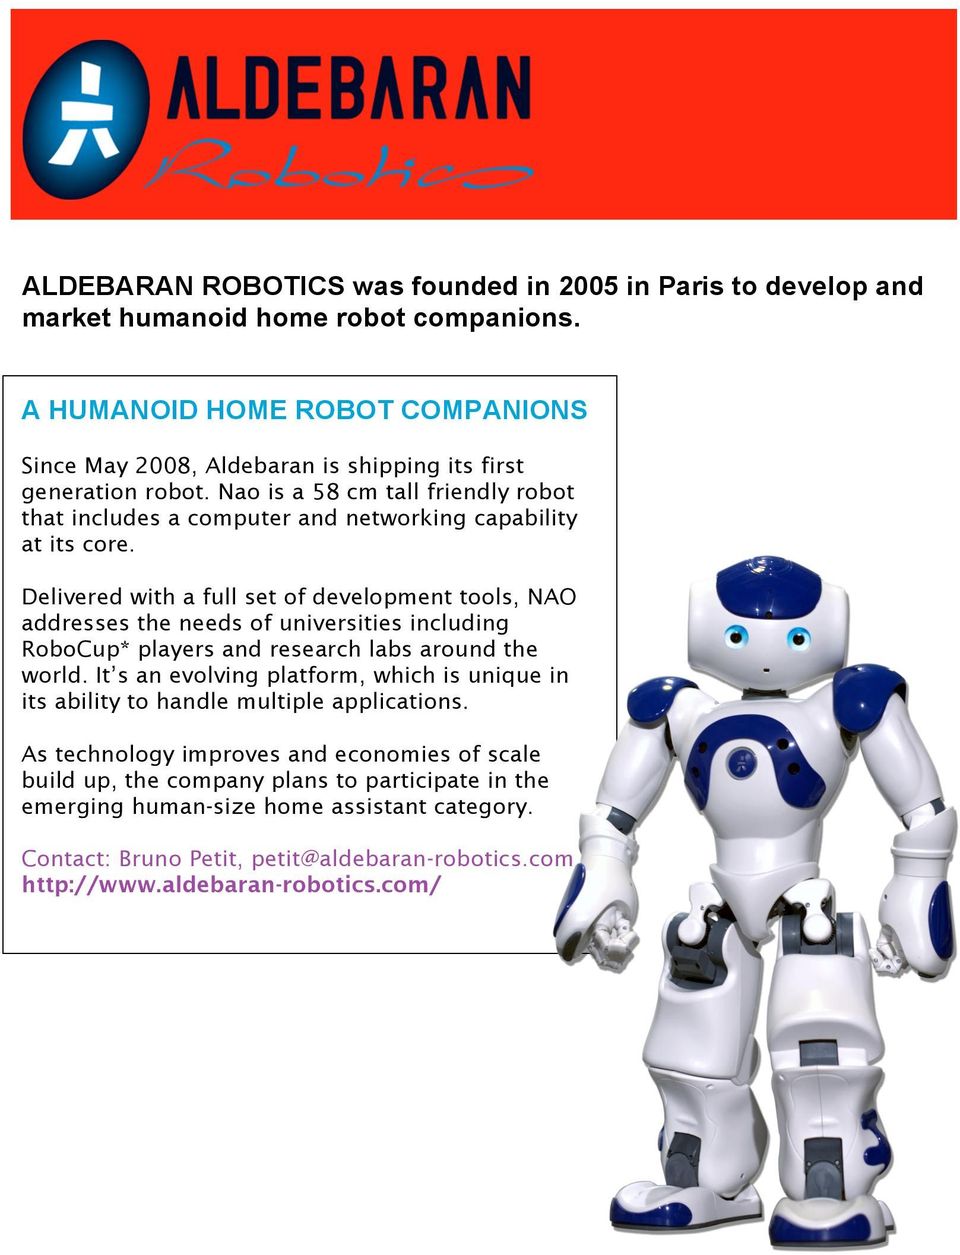 Nao is a 58 cm tall friendly robot that includes a computer and networking capability at its core.